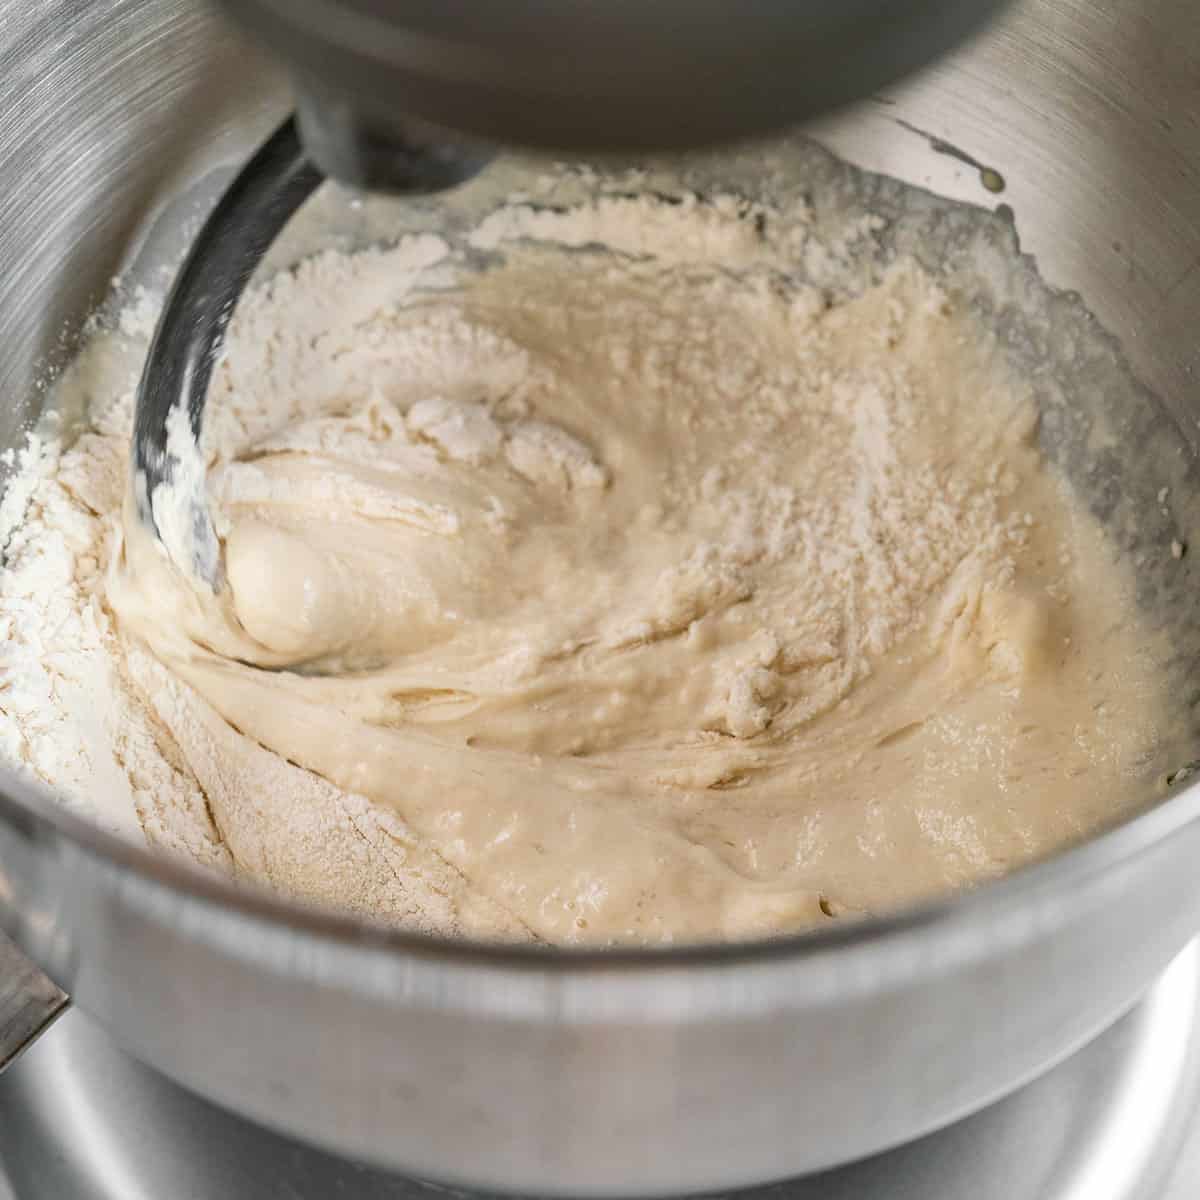 making pita bread dough in a stainless steel standing mixer